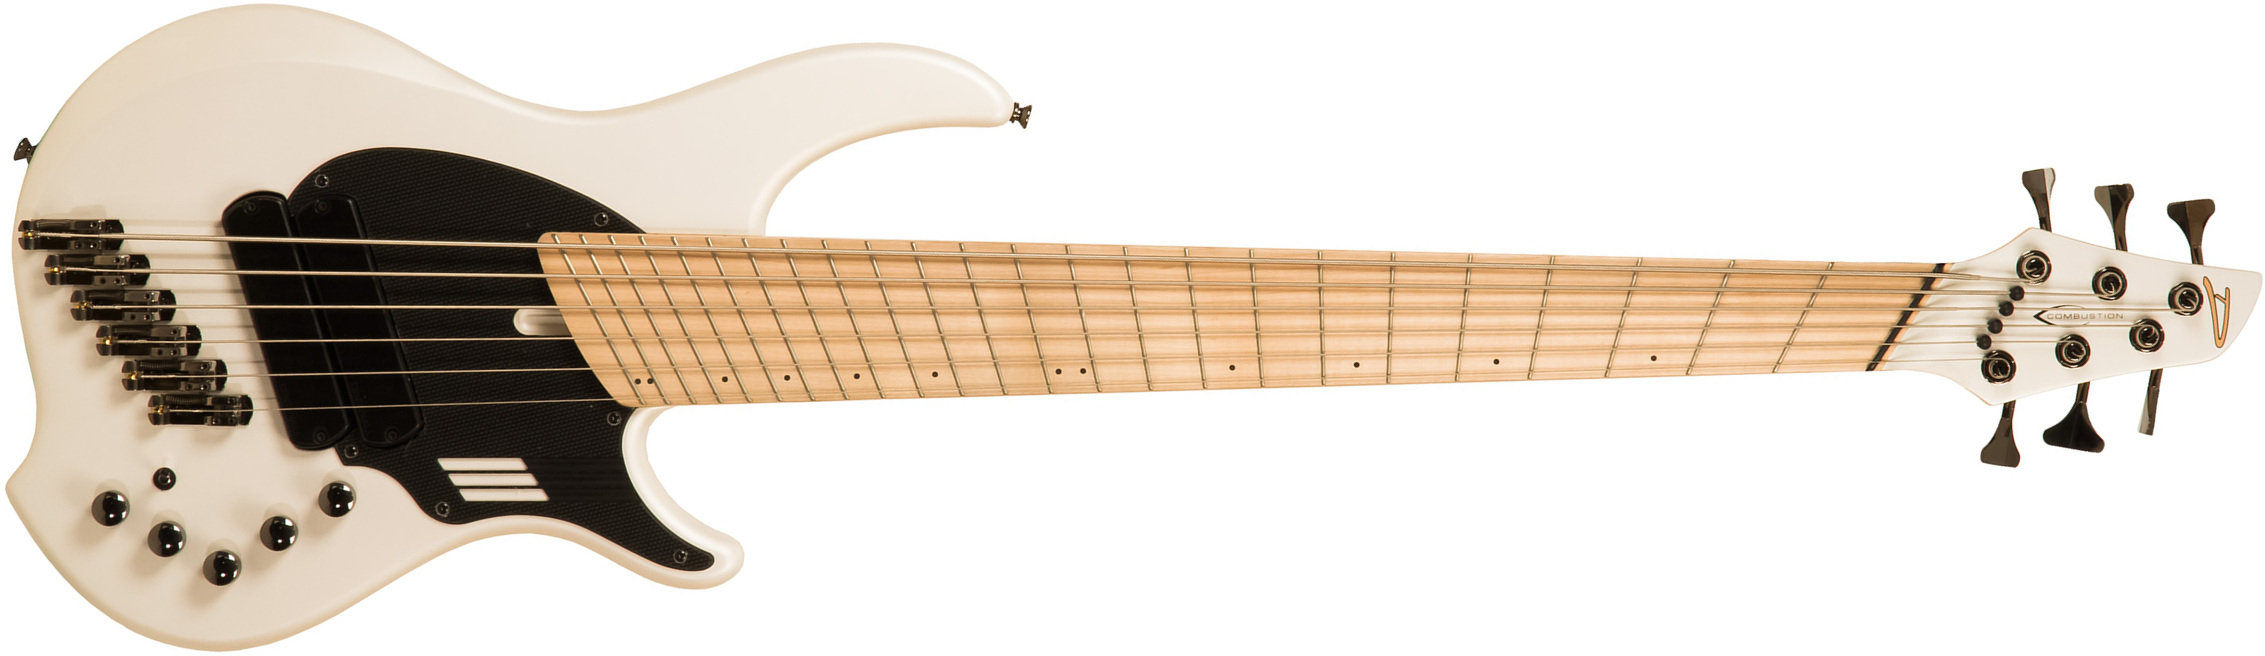 Dingwall Adam Nolly Getgood Ng2 6c 2pu Signature Active Mn - Ducati Pearl White - Solidbody E-bass - Main picture